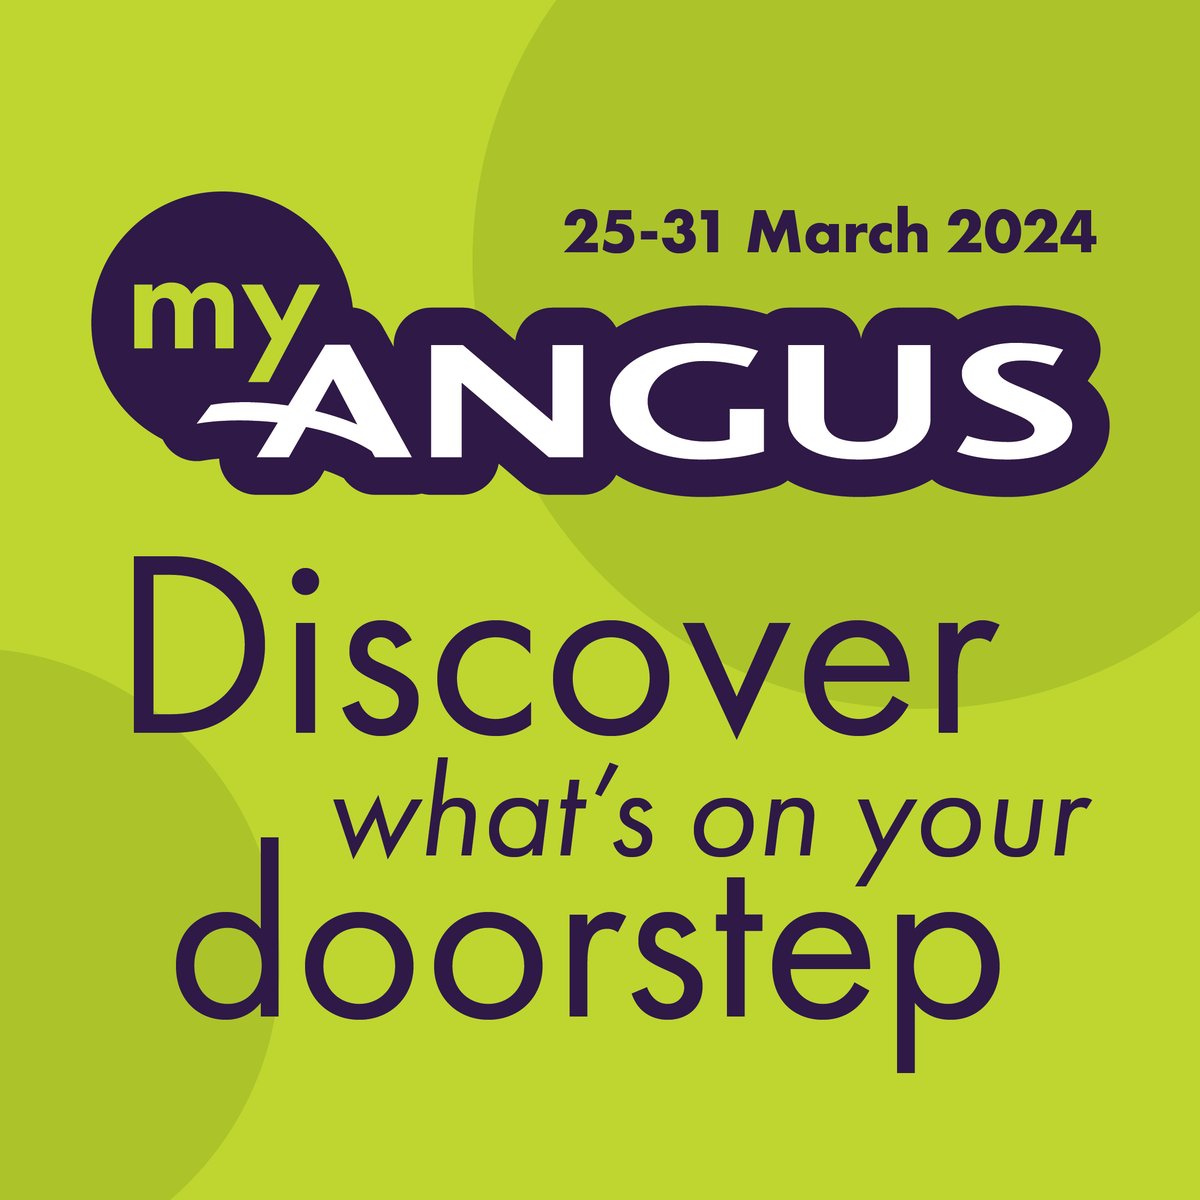 Do you live in Angus? My Angus will take place from 25 to 31 March 2024, offering Angus residents unique opportunities at attractions throughout Angus, allowing you to discover what is on your doorstep. Check out the programme at visitangus.com/myangus. #MyAngus